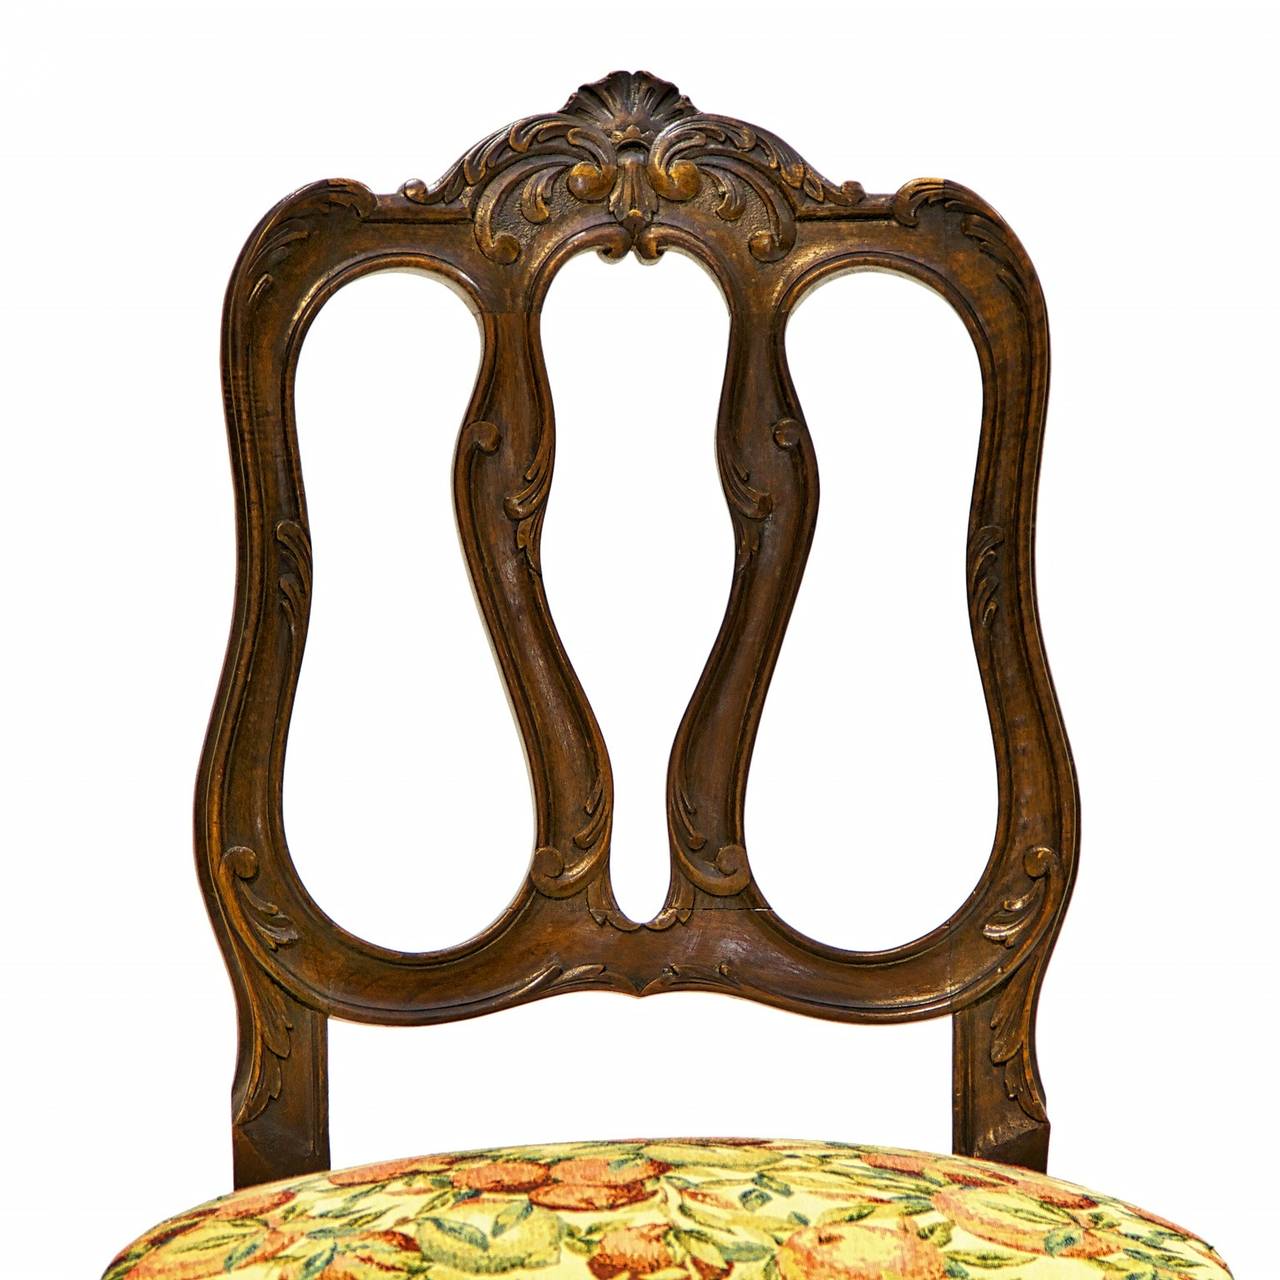 A stylish set of 8 Lyonnaise side chairs made from french walnut. These chairs are in the Louis XV style. The unique and sturdy backs have a shaped splat design. There is a detailed carve shell centered on the apron of the chairs. Elegant cabriole